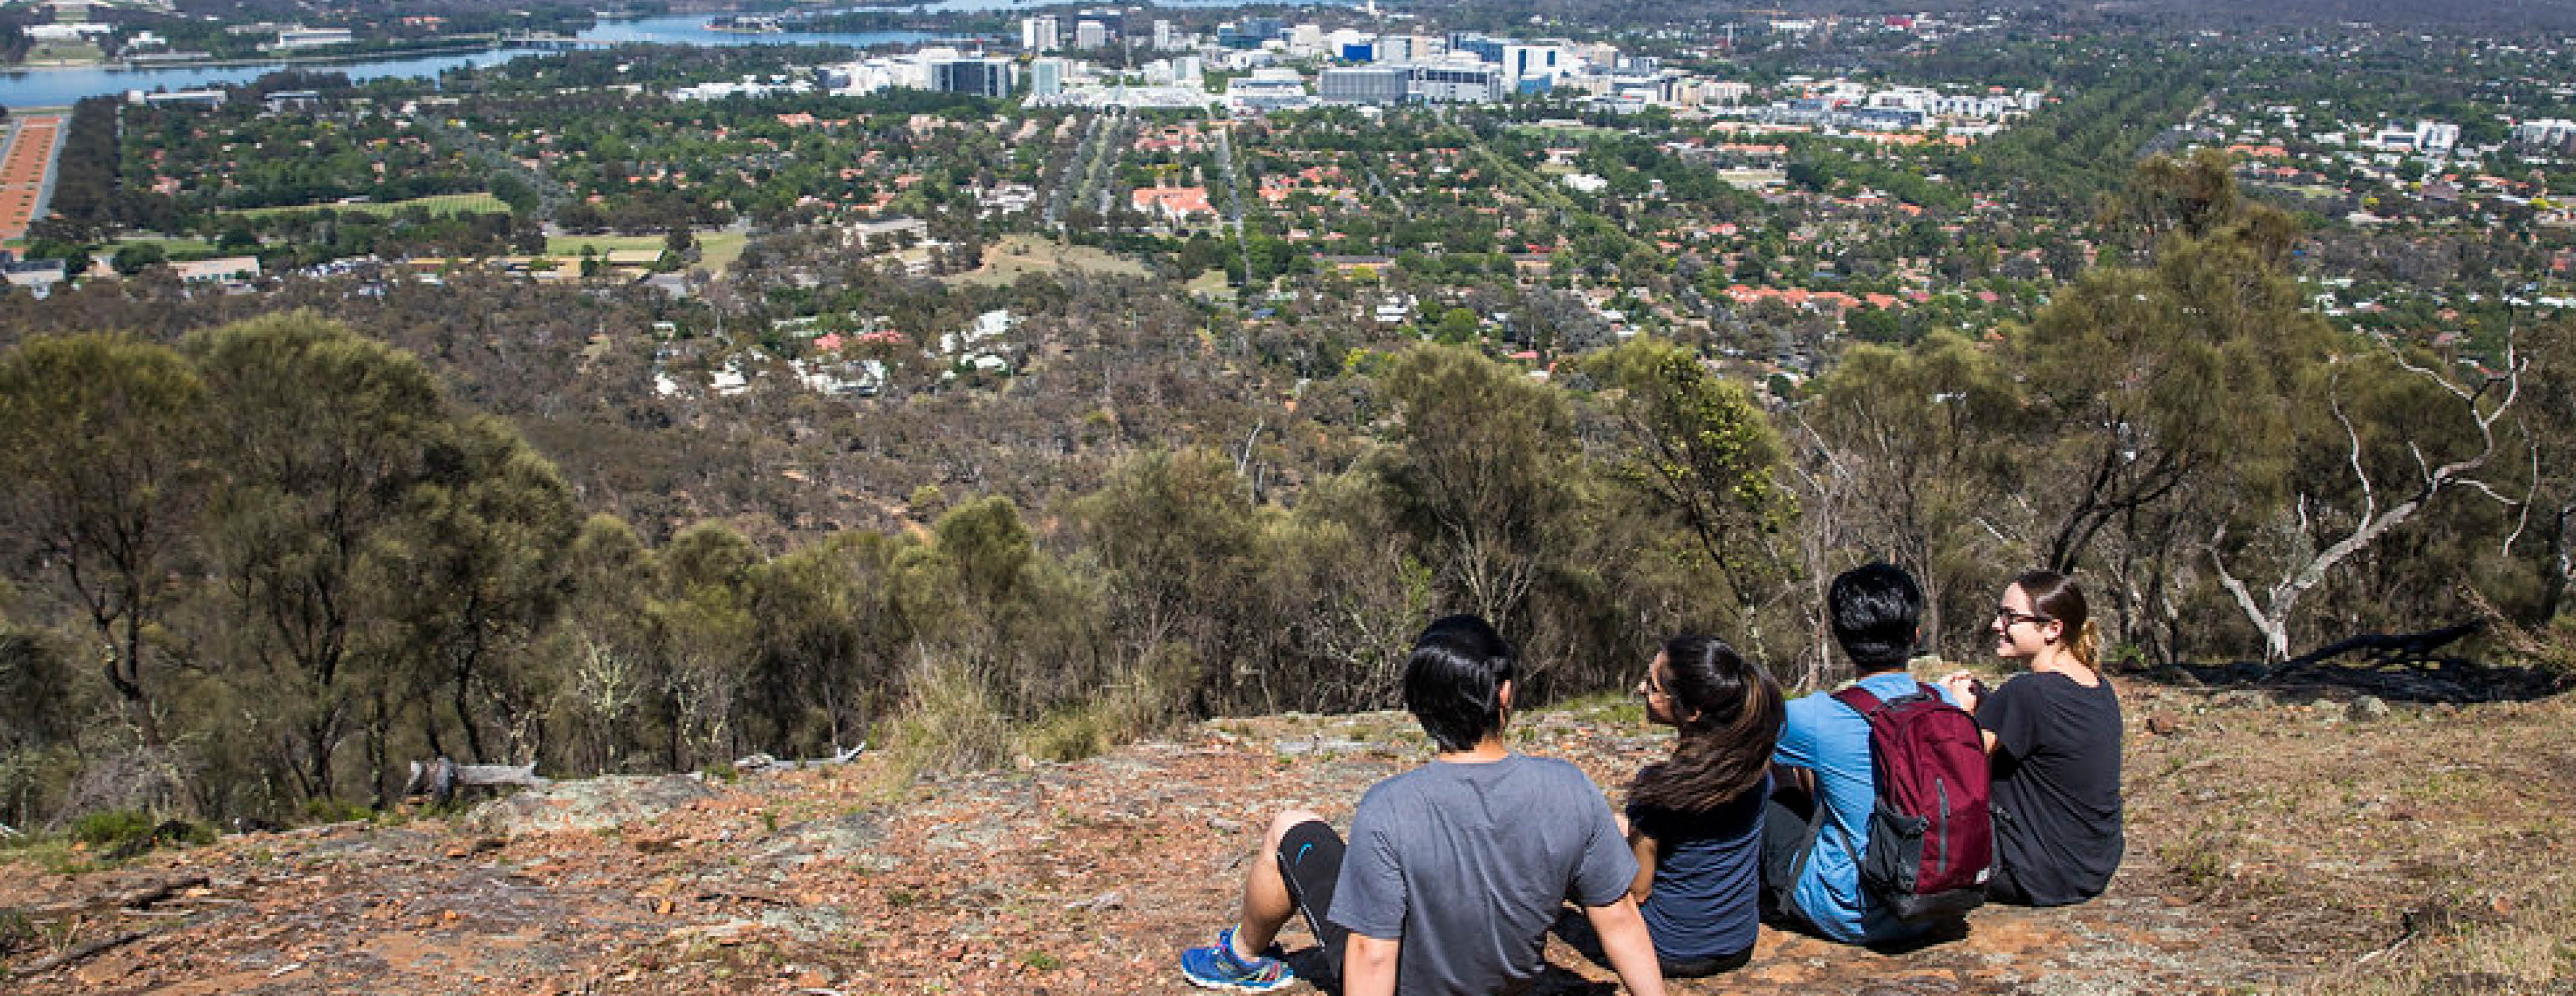 Students enjoy the breathtaking view of Canberra that overlooks the city, Anzac Parade and Parliament House from Mount Ainslie.